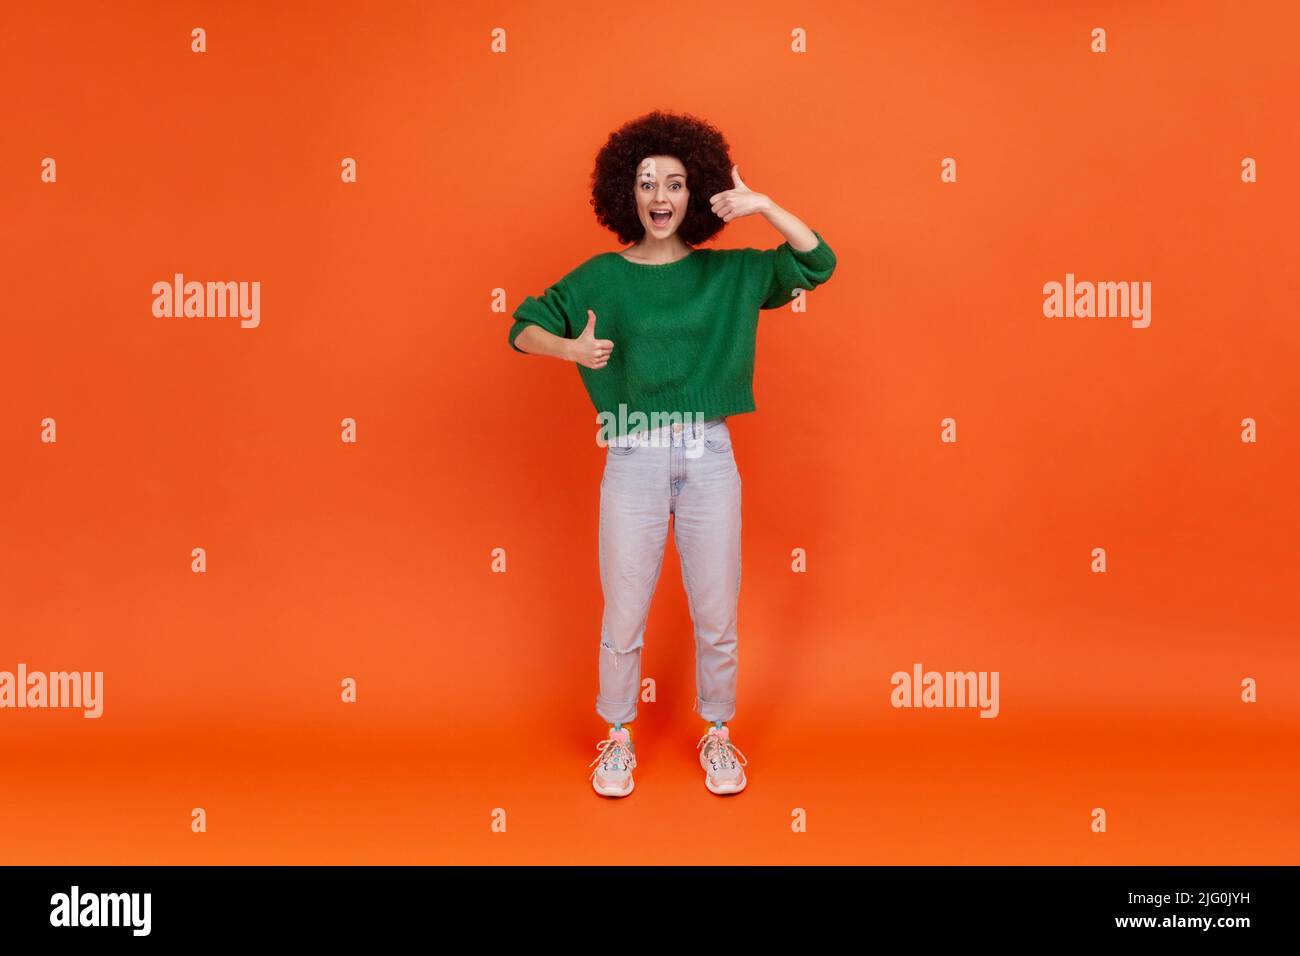 Full length portrait of happy friendly woman with Afro hairstyle wearing green casual style sweater standing with thumbs up, expressing positive. Indoor studio shot isolated on orange background. Stock Photo